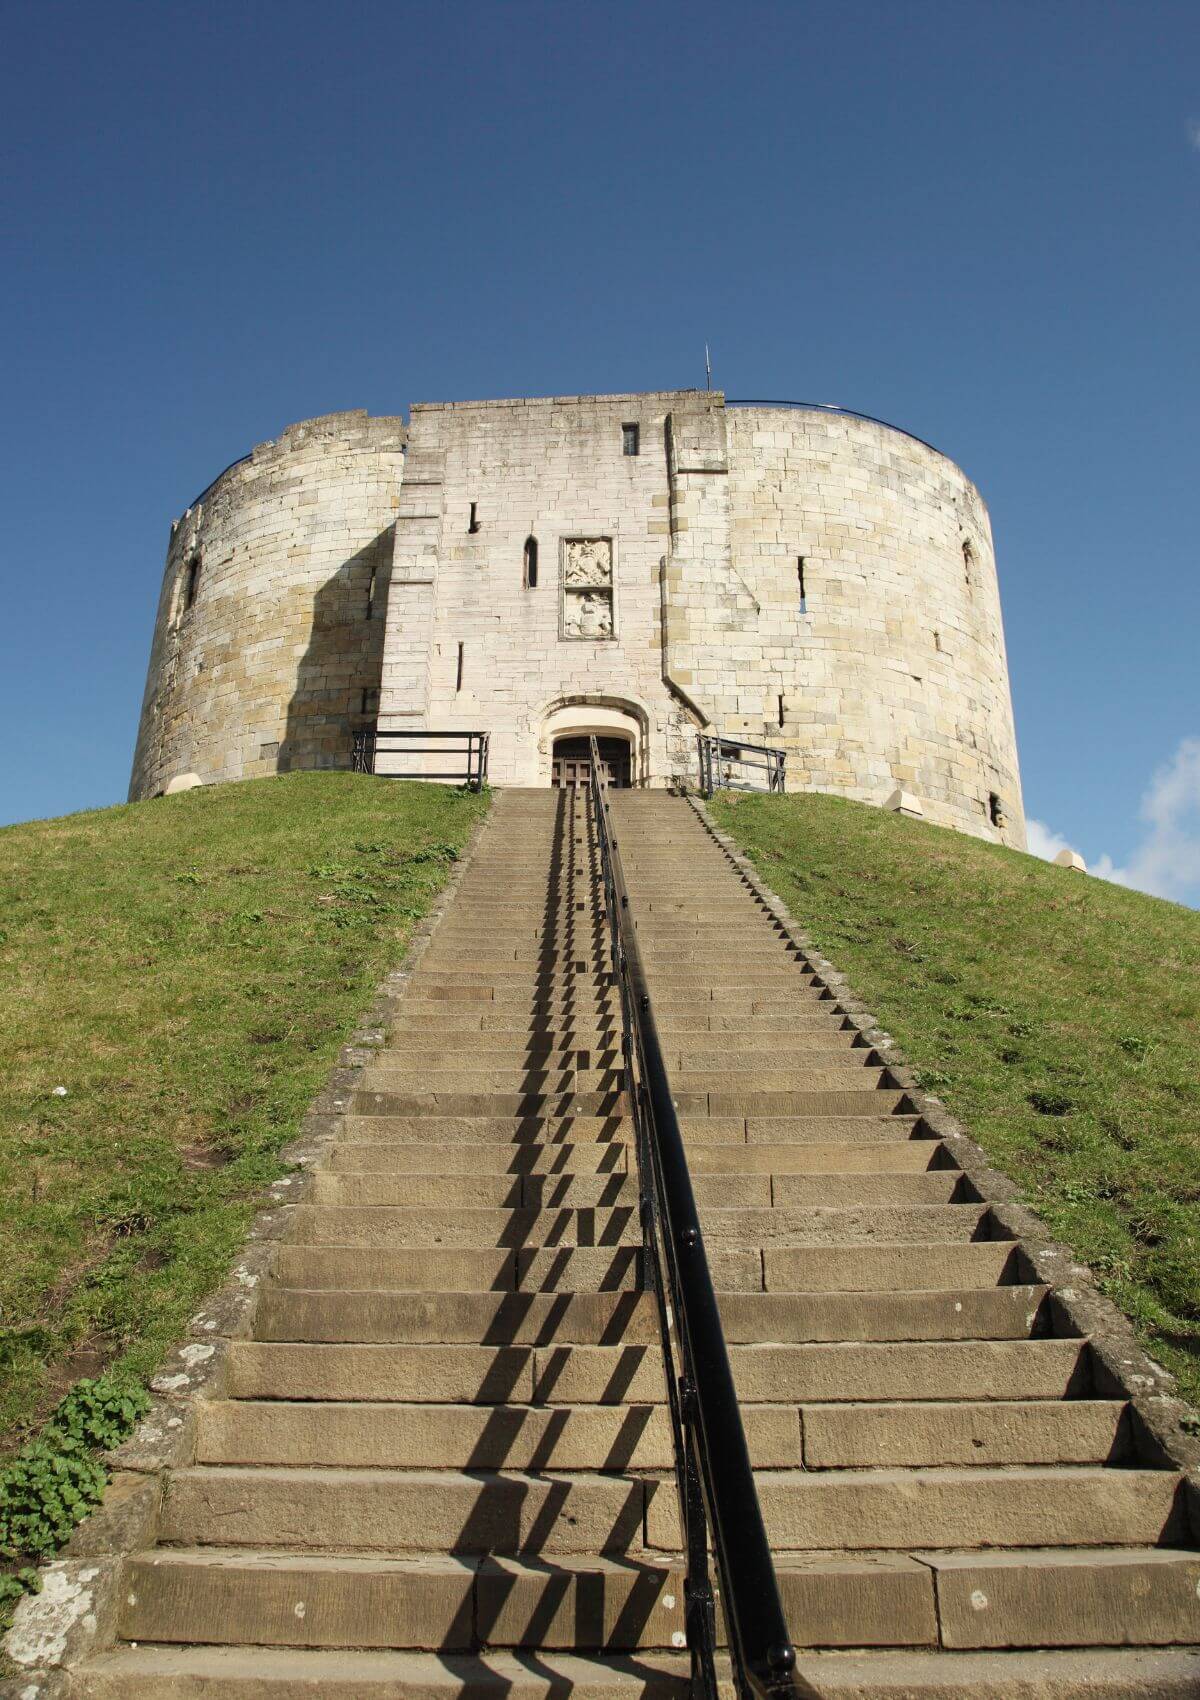 Day trip to Clifford's Tower, York